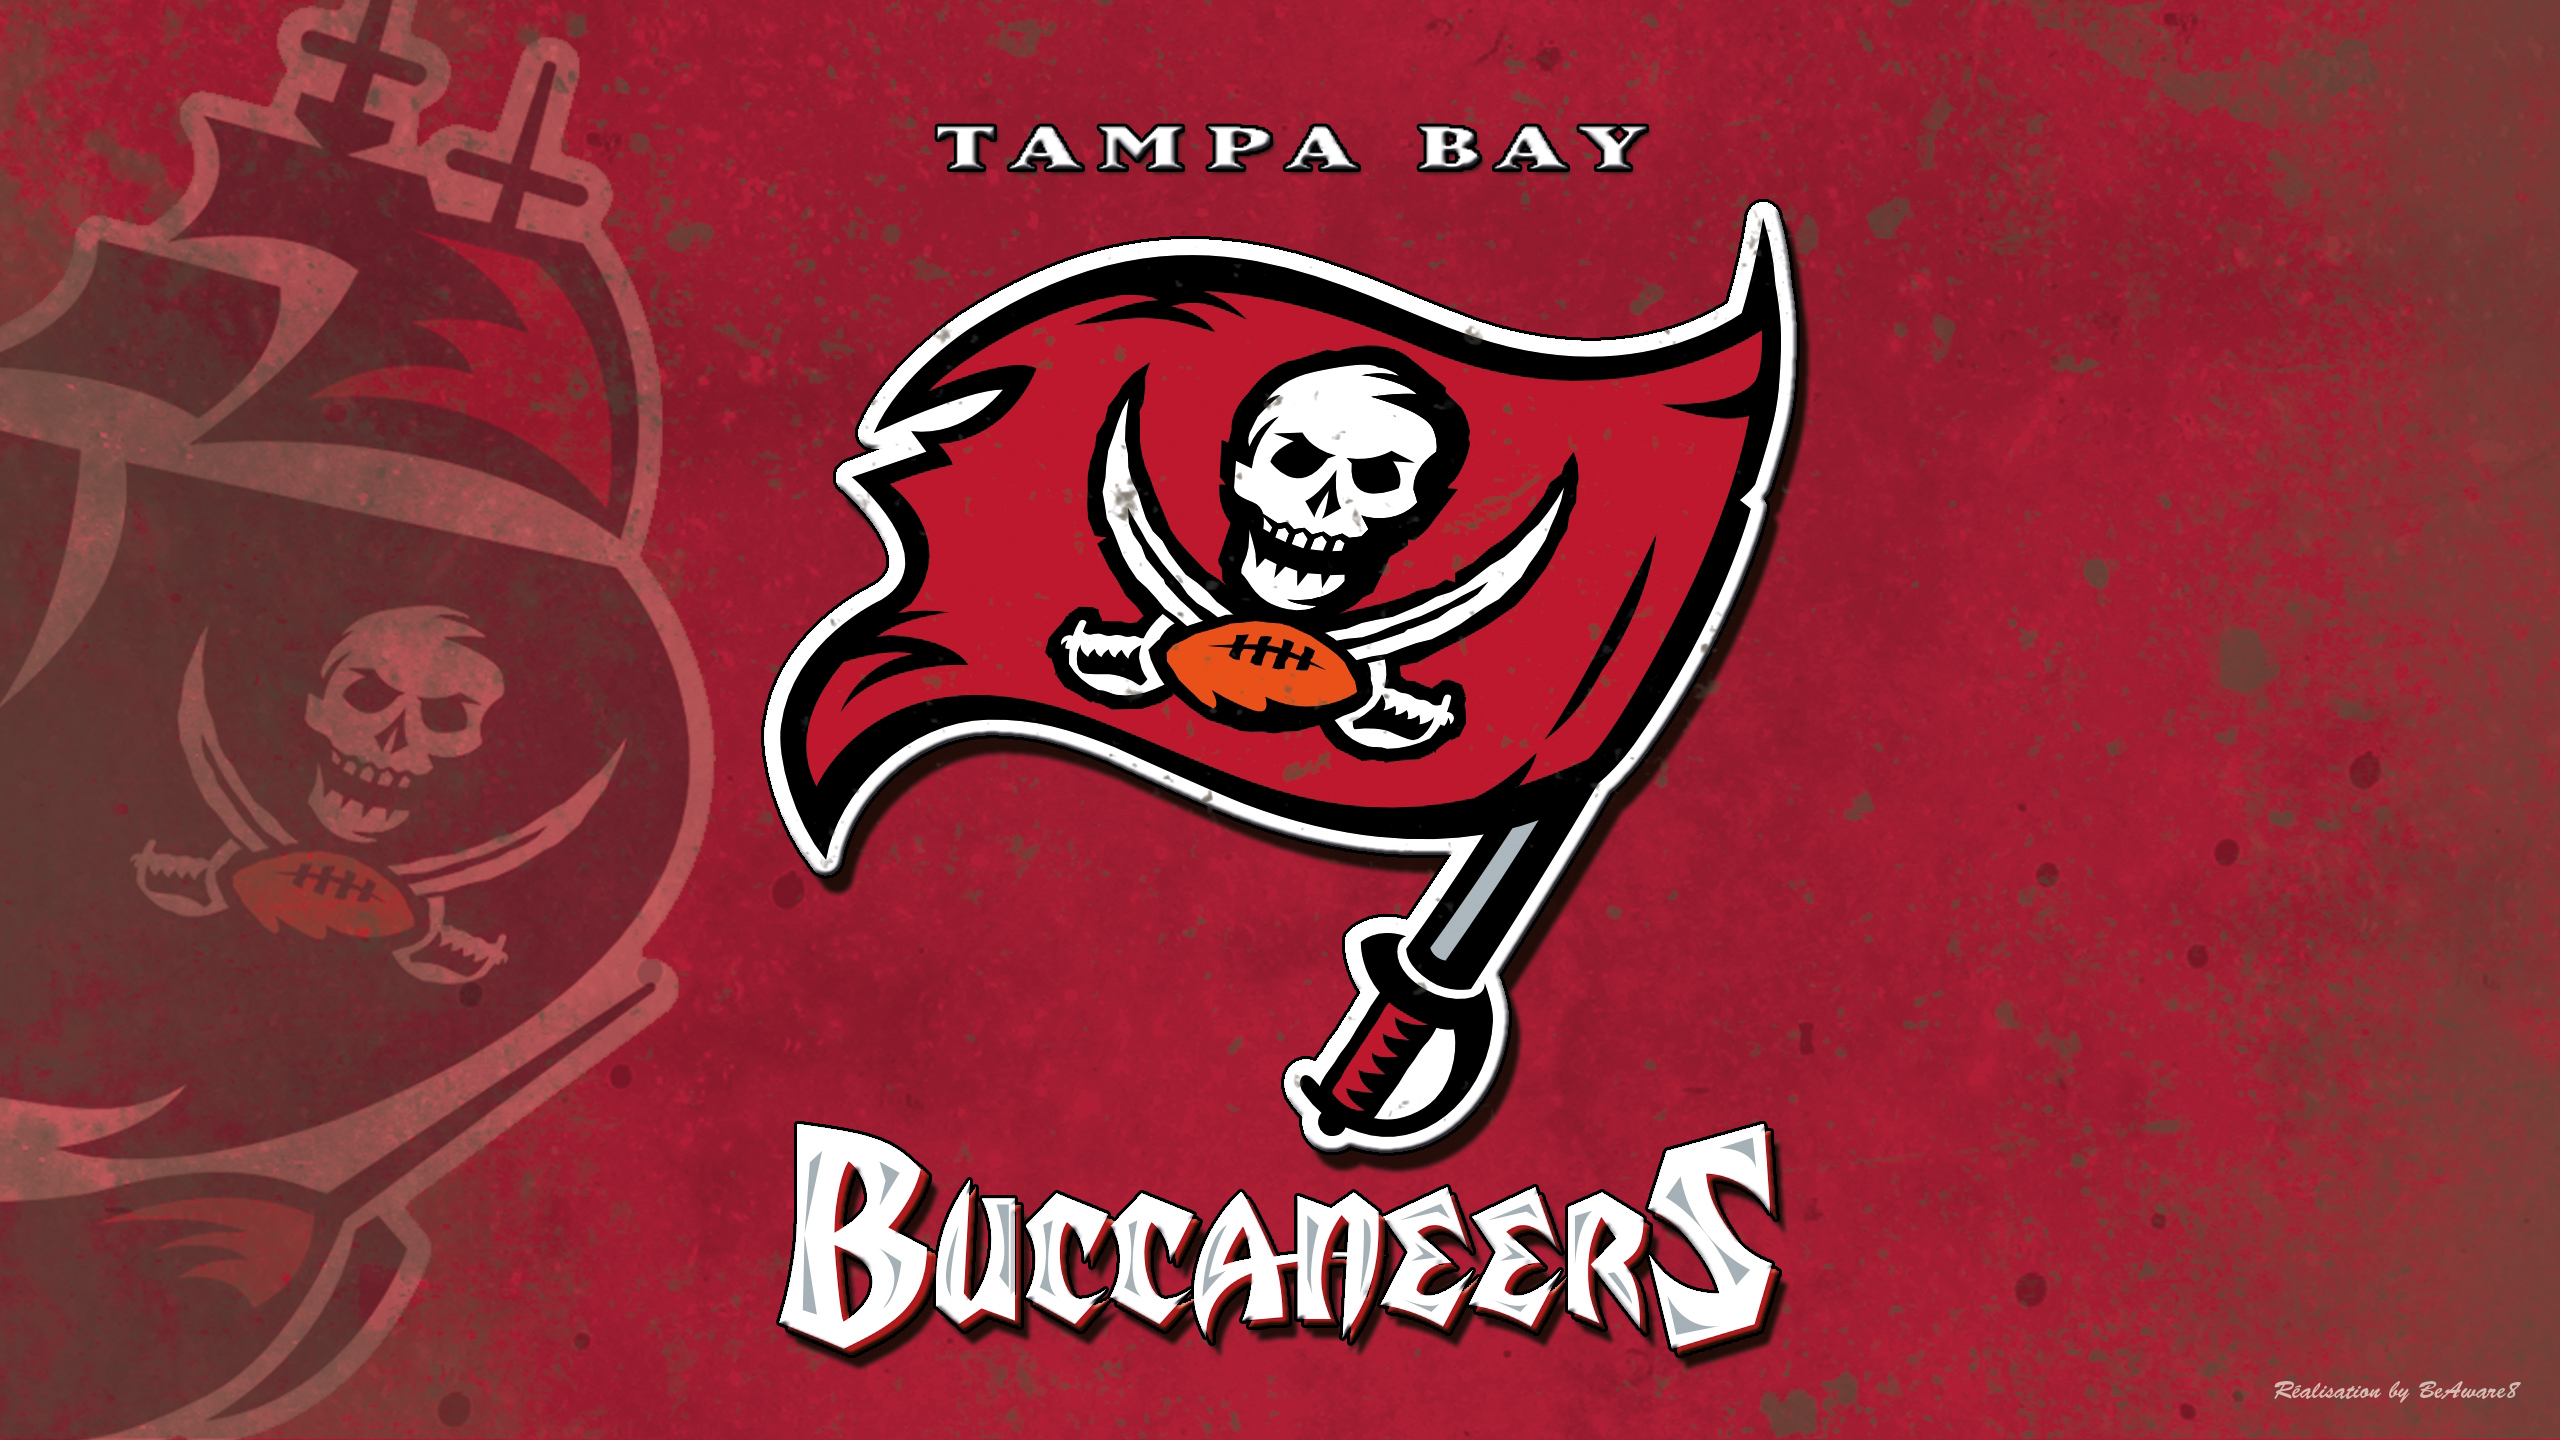 Tampa Bay Buccaneers by BeAware8 on